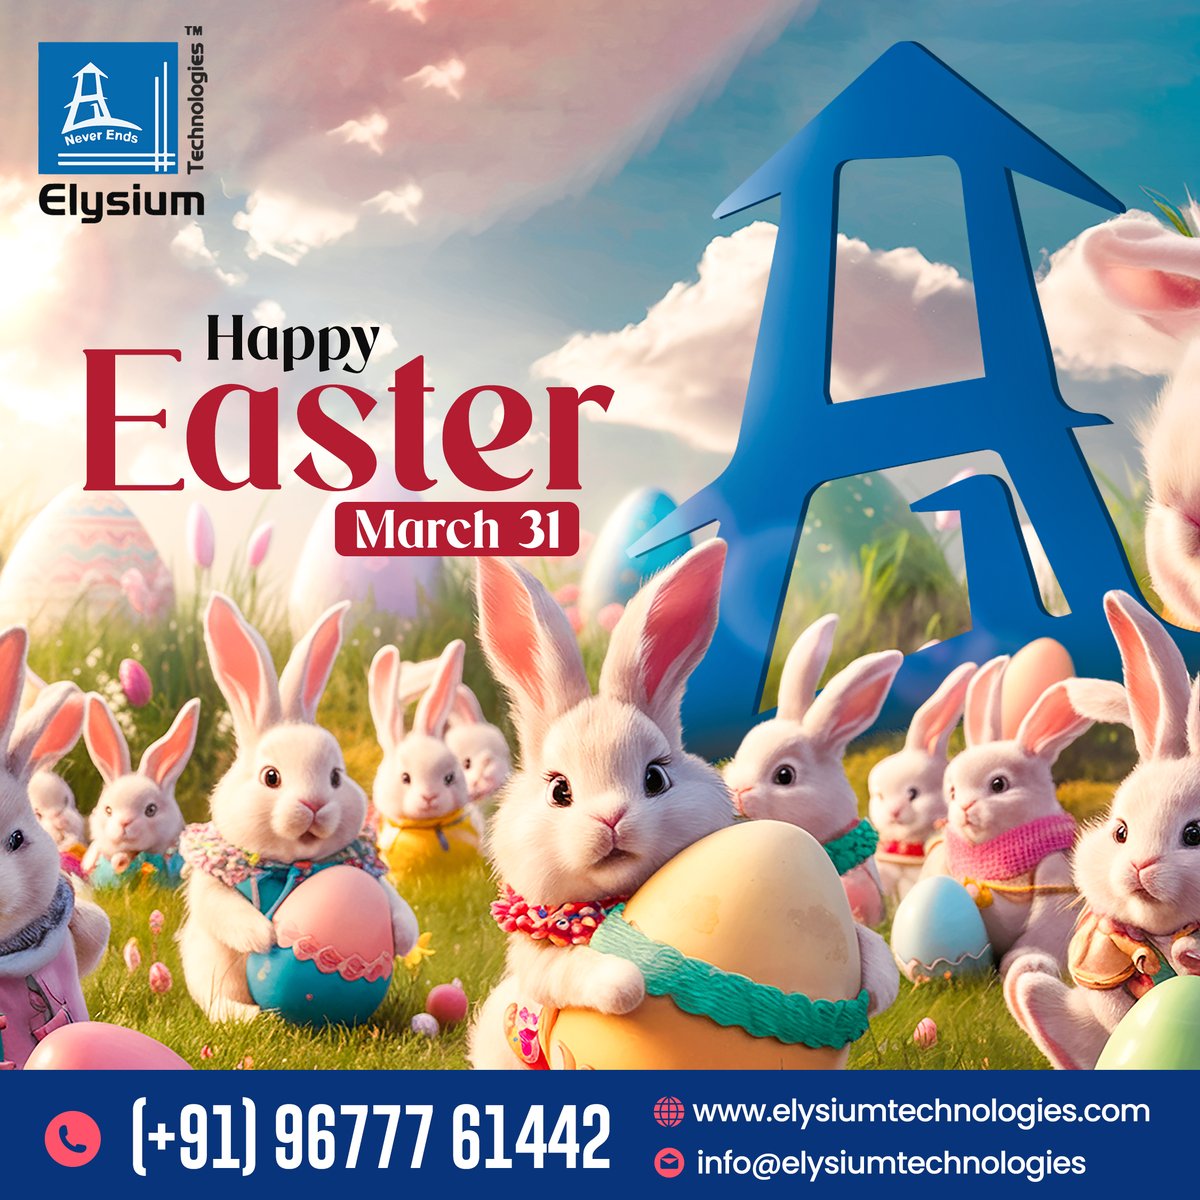 #elysiumtechnologies #ETPL #datascienceconsultation #ConsultingServices #datascienceagency #Mechinelearning #Datasolutions #DataScienceConsultancy #HappyEaster #ExpertGuidance #CuttingEdgeSolutions #StrategicInsights #DedicatedSupport